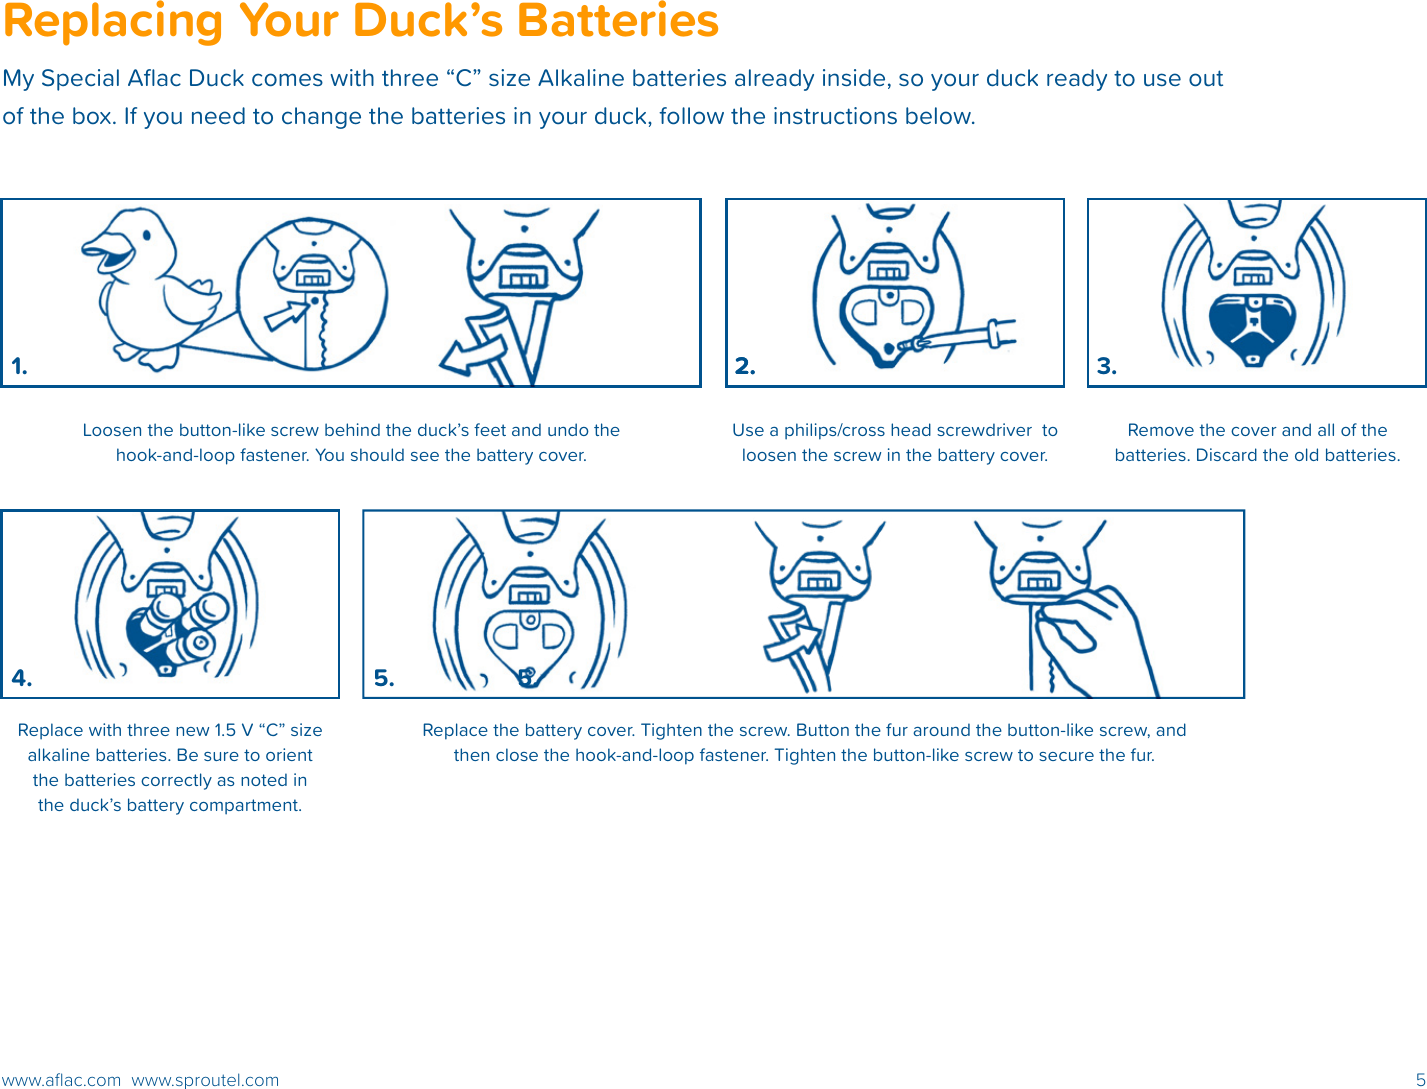 5www.aﬂac.com  www.sproutel.comReplacing Your Duck’s BatteriesMy Special Aﬂac Duck comes with three “C” size Alkaline batteries already inside, so your duck ready to use out of the box. If you need to change the batteries in your duck, follow the instructions below.Loosen the button-like screw behind the duck’s feet and undo the hook-and-loop fastener. You should see the battery cover.Use a philips/cross head screwdriver  to loosen the screw in the battery cover. Remove the cover and all of the batteries. Discard the old batteries.Replace the battery cover. Tighten the screw. Button the fur around the button-like screw, and then close the hook-and-loop fastener. Tighten the button-like screw to secure the fur. Replace with three new 1.5 V “C” size alkaline batteries. Be sure to orient the batteries correctly as noted in the duck’s battery compartment.4. 5. 5.3.1. 2.2.